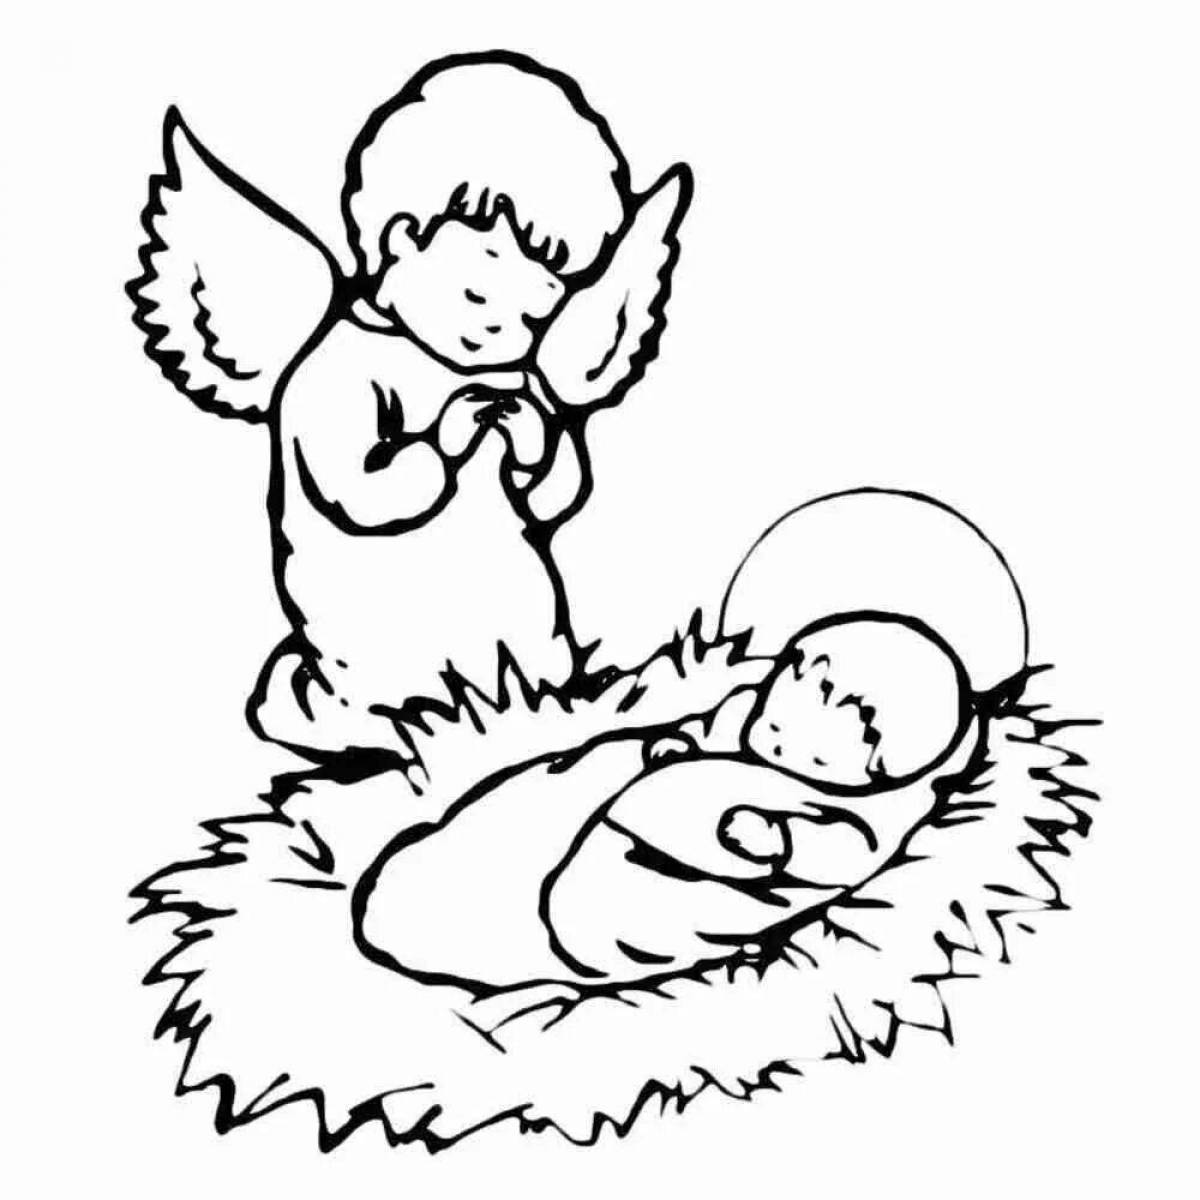 Coloring page venerated birth of jesus christ